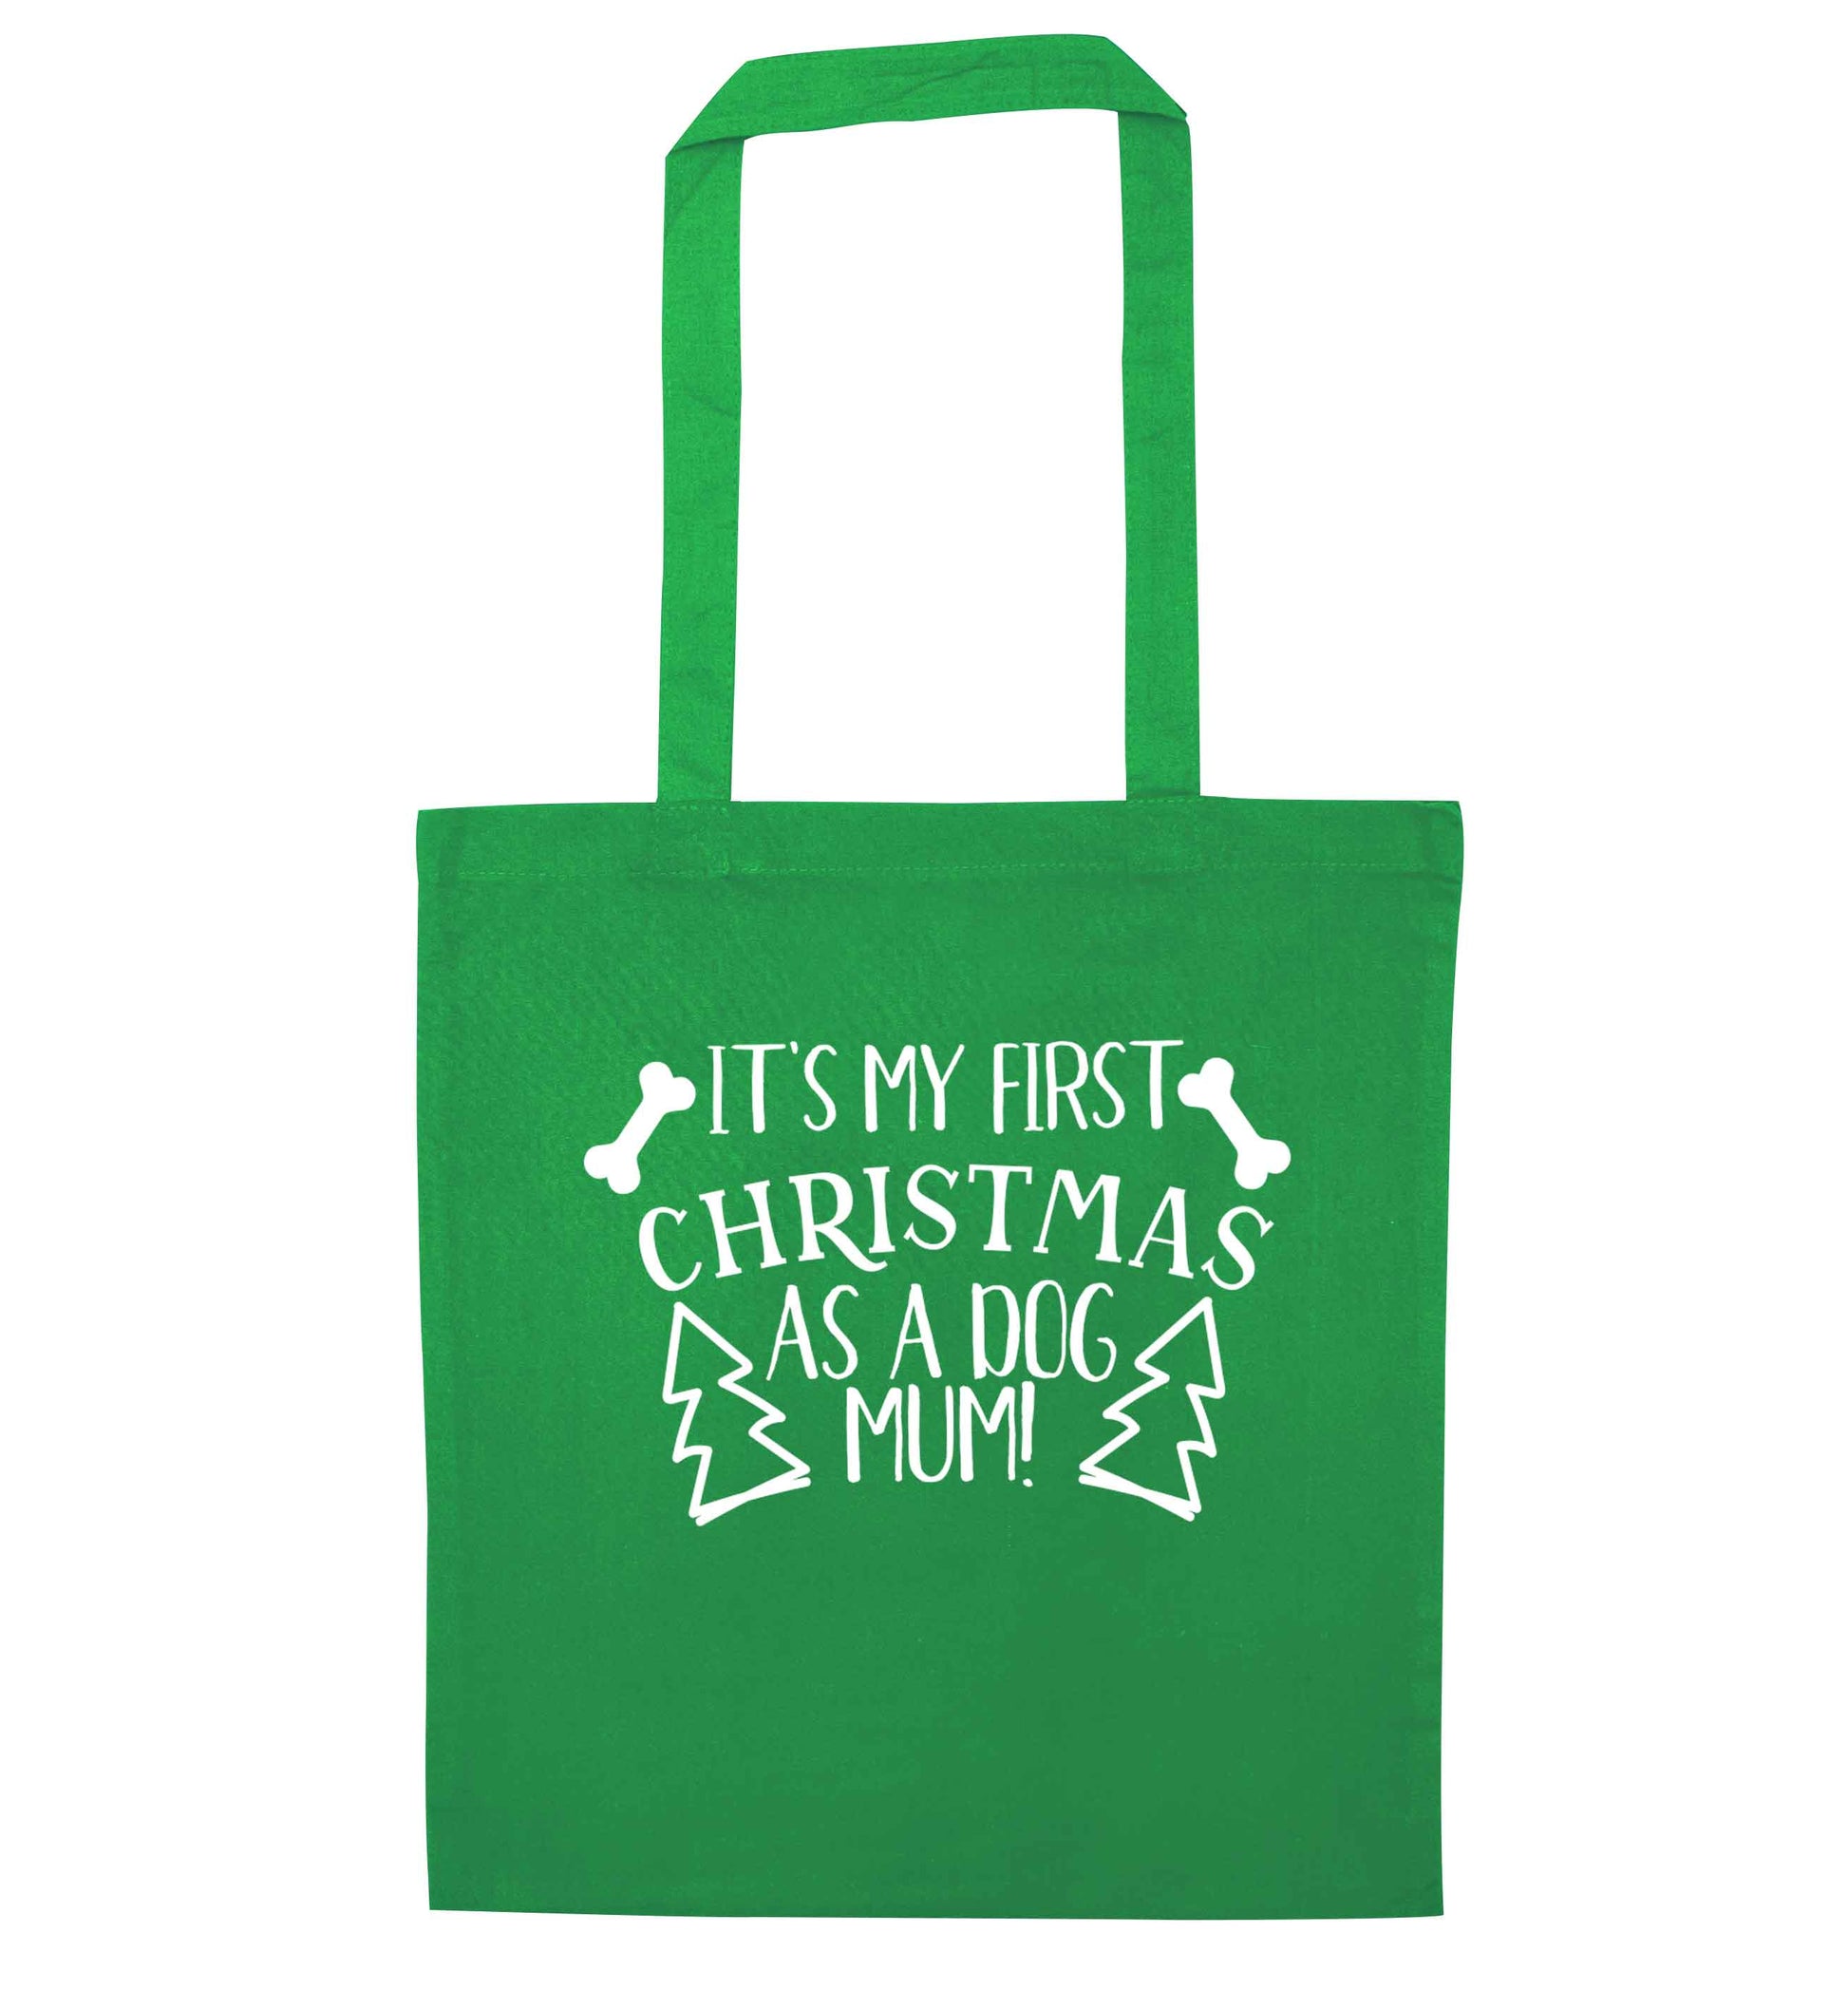 It's my first Christmas as a dog mum! green tote bag